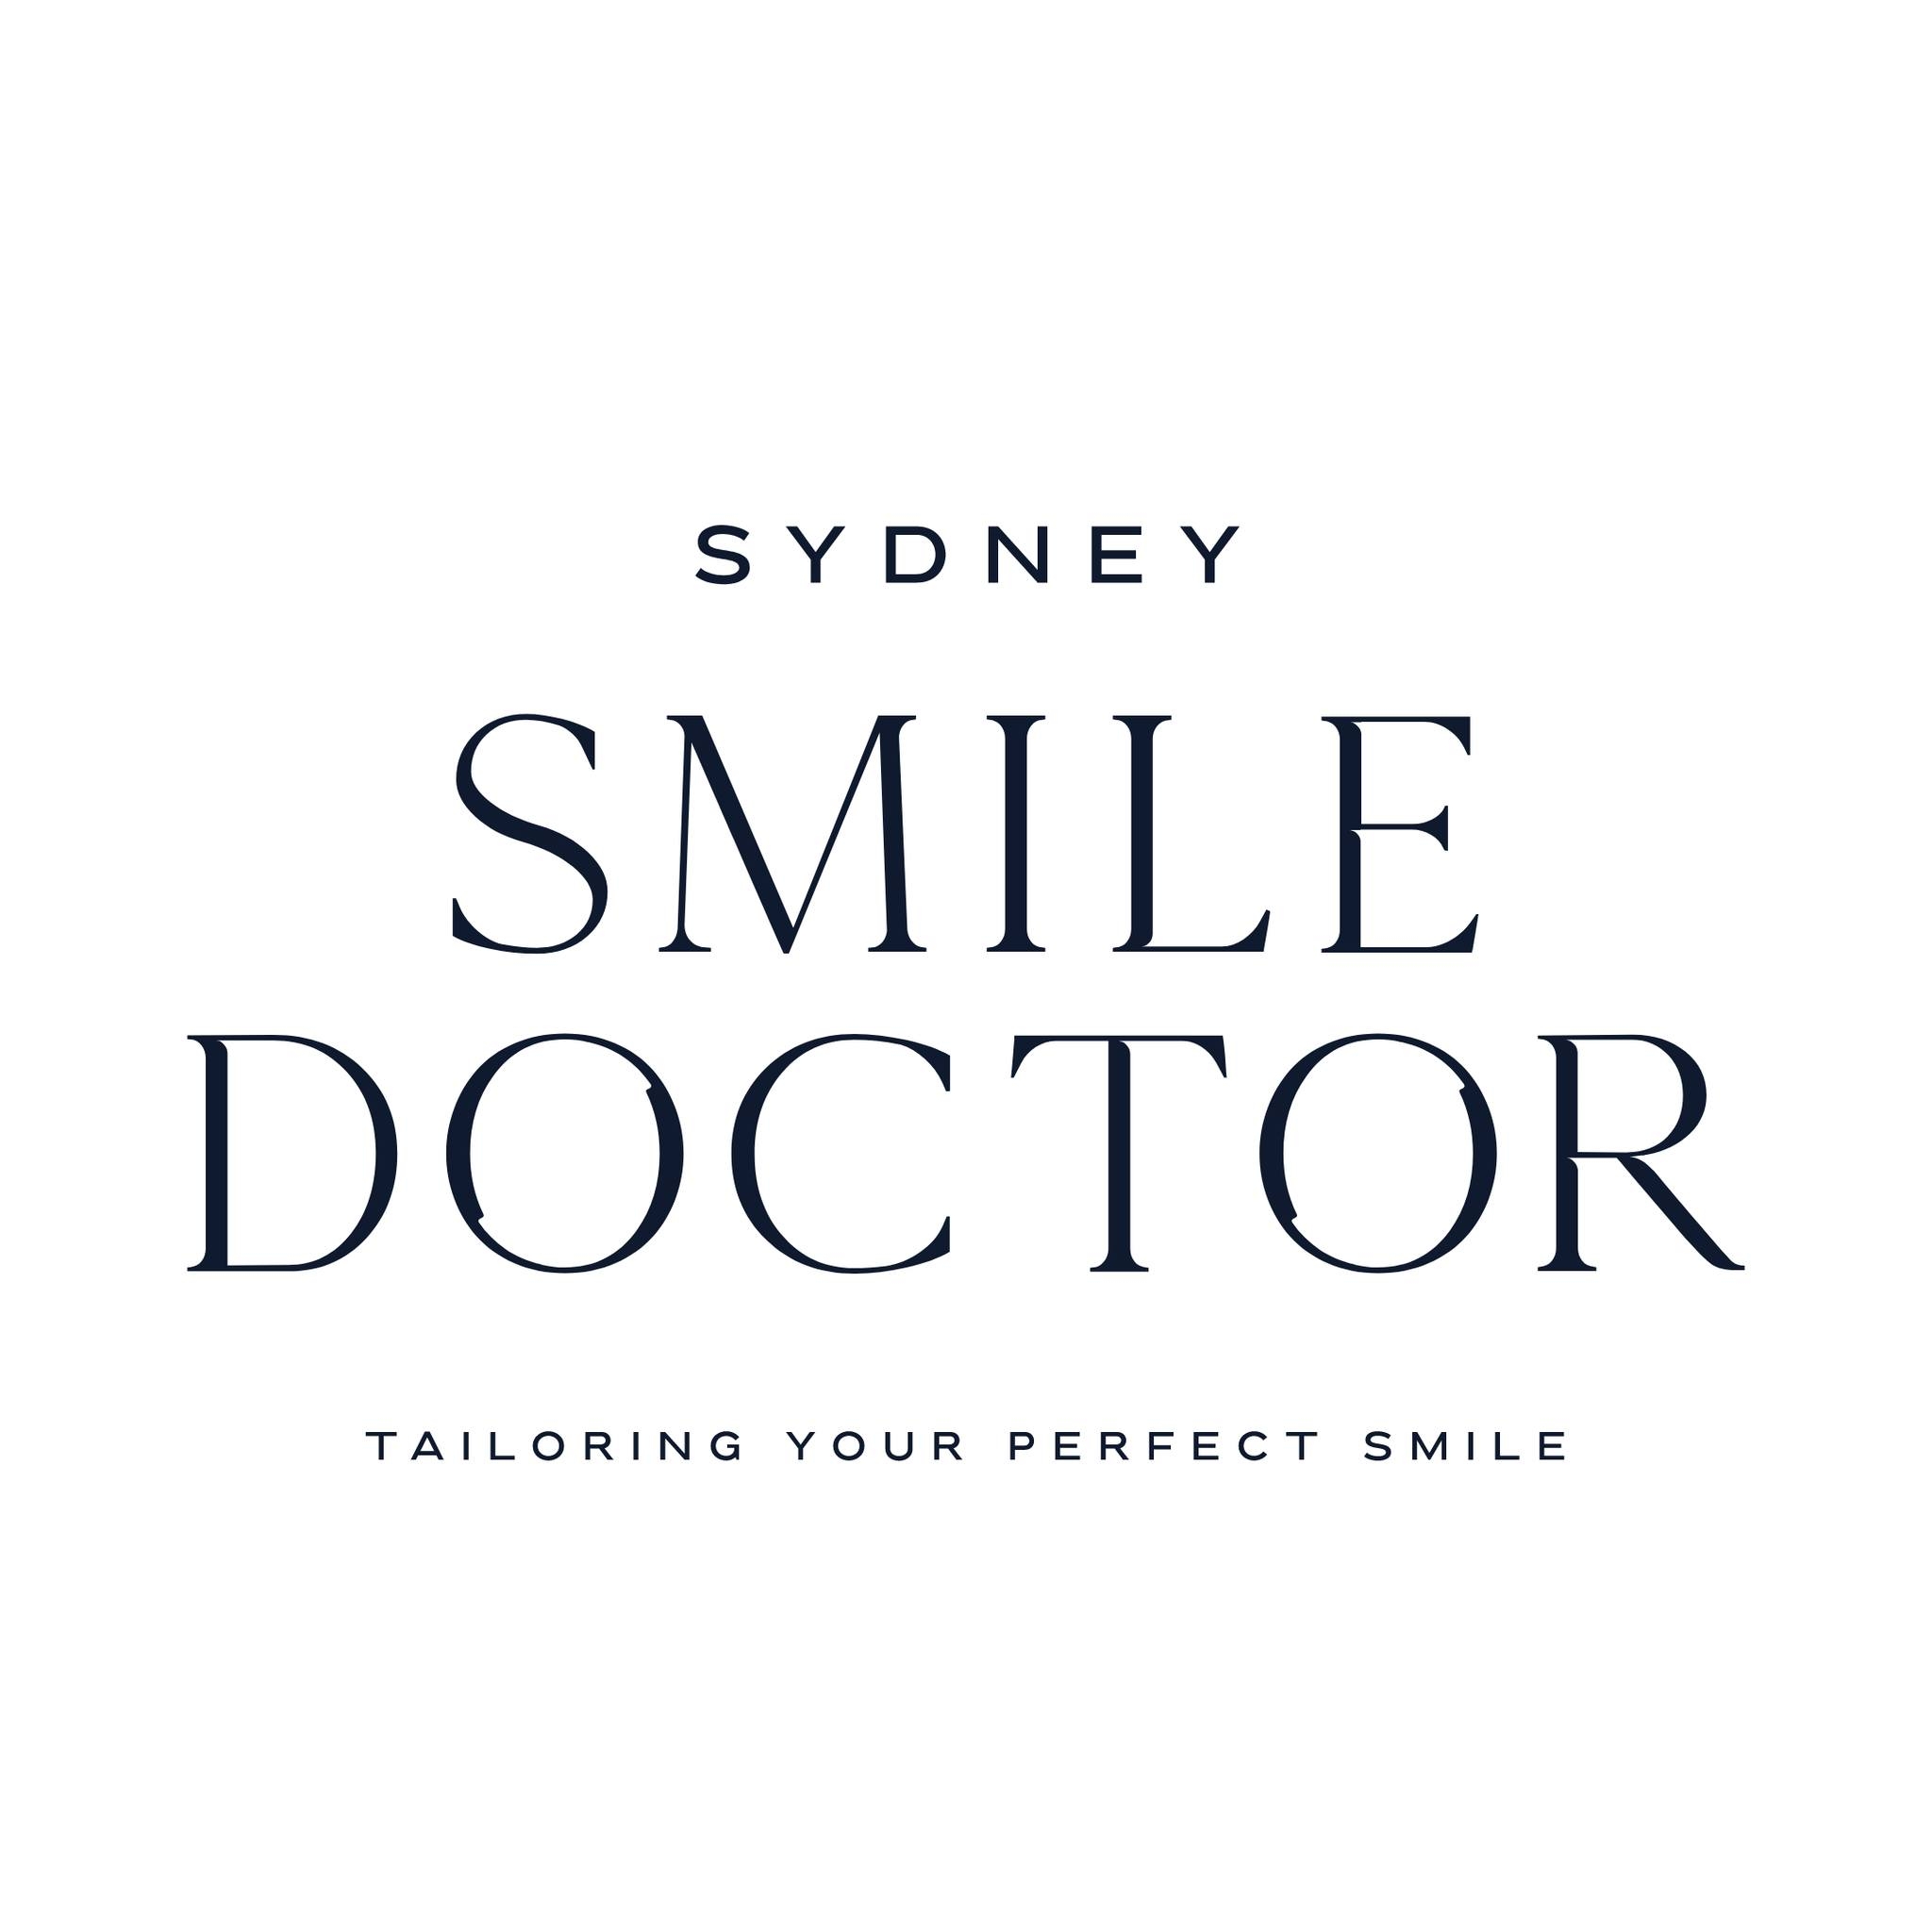 Sydney Smile Doctor Offers Premier Cosmetic Dentistry Services in Penrith